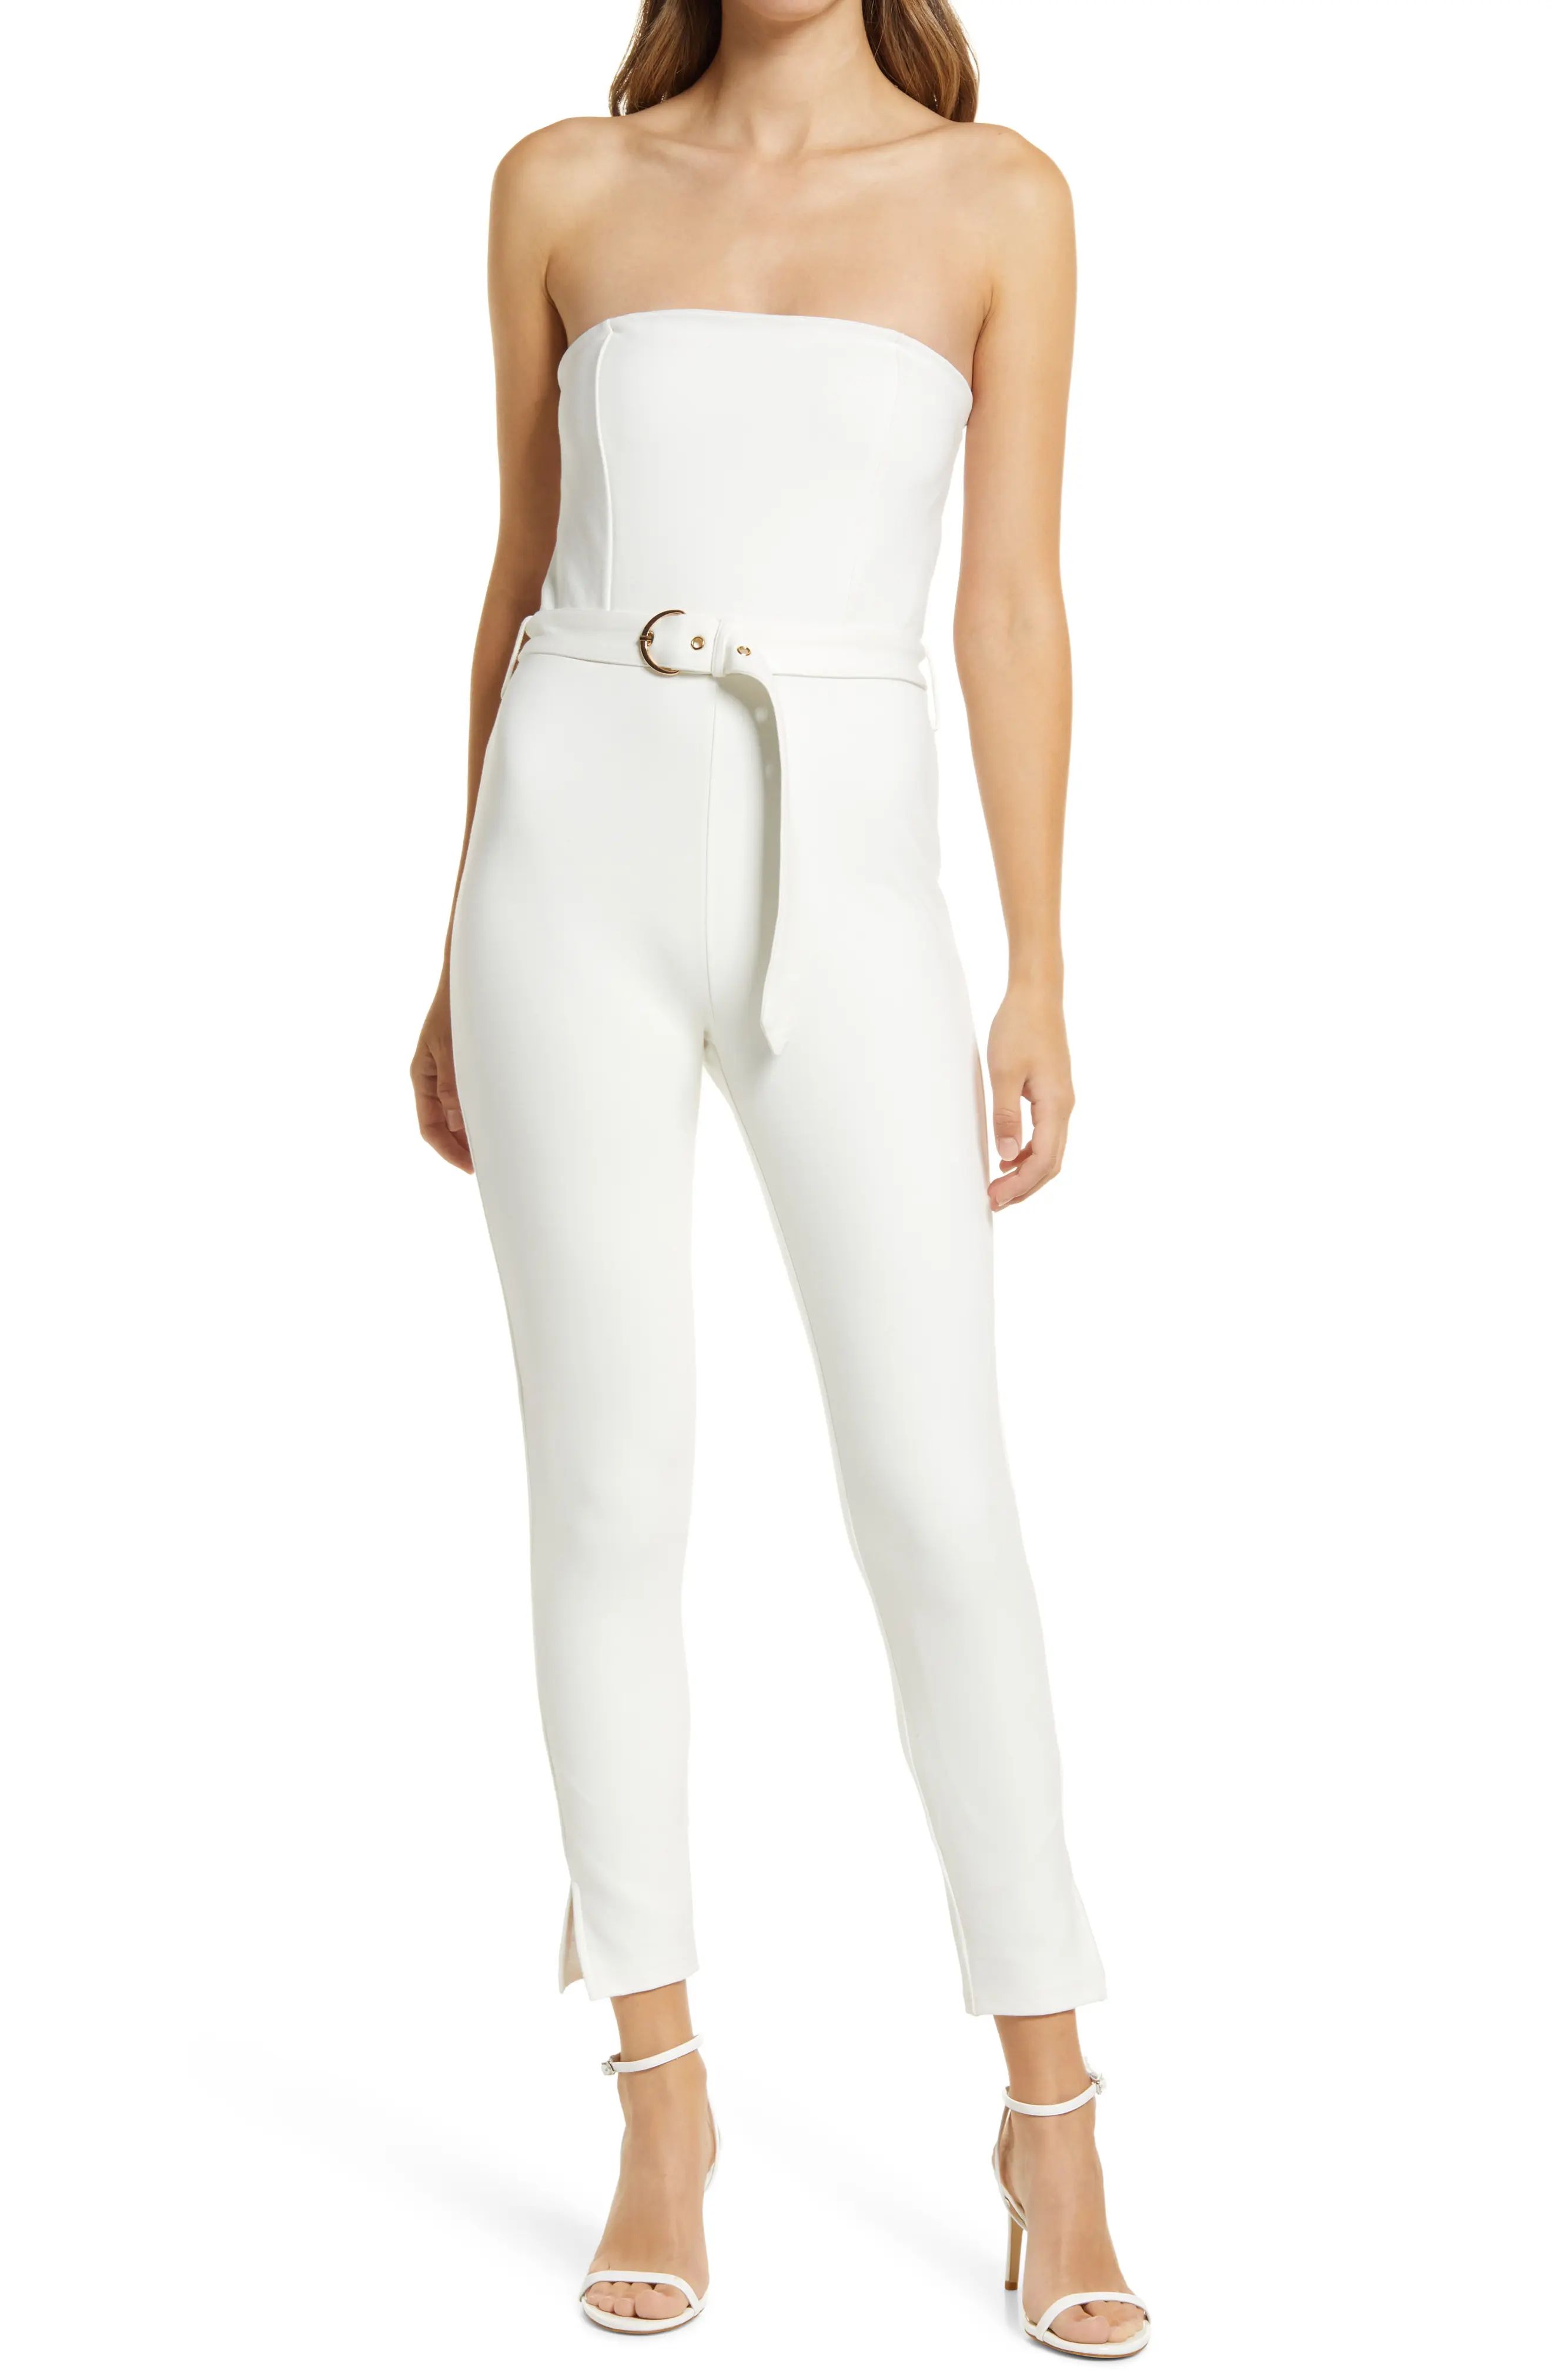 bebe Ponte Knit Strapless Belted Jumpsuit, Size Small in White at Nordstrom | Nordstrom